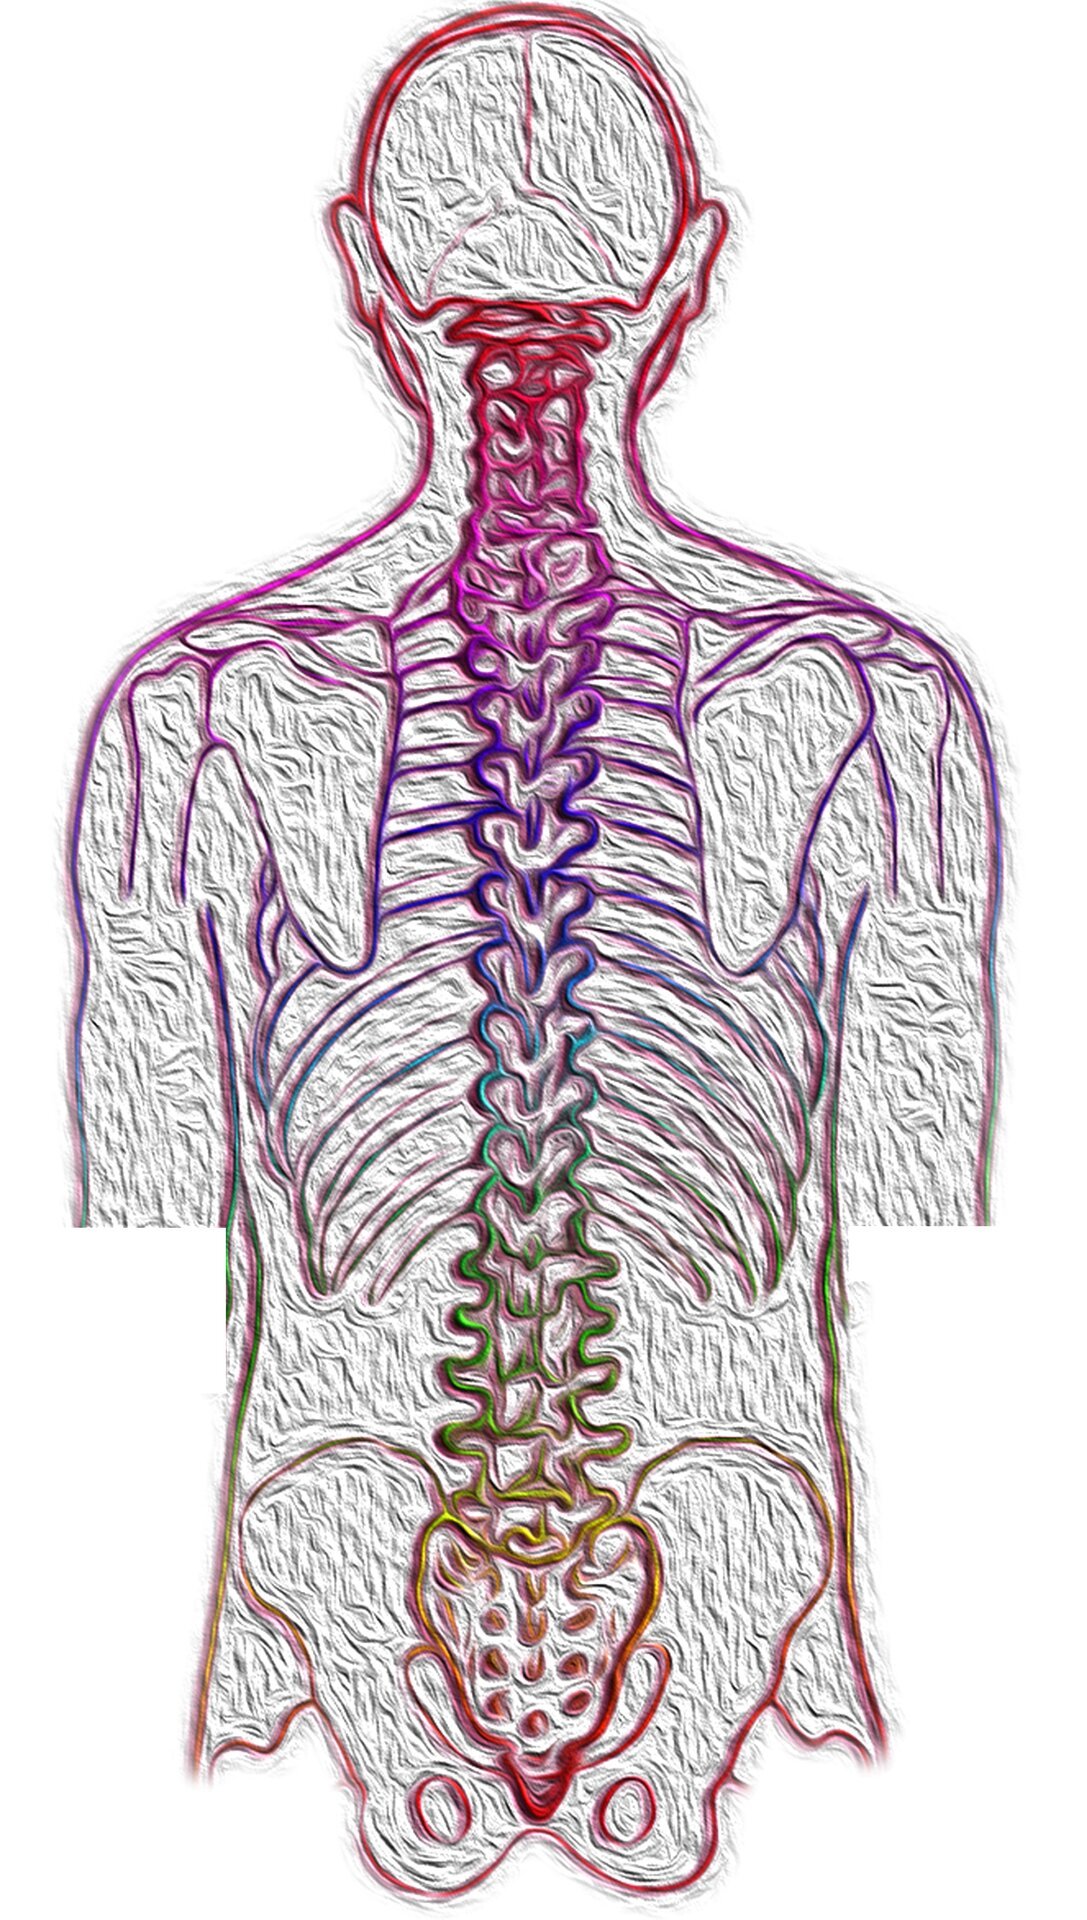 A call for comprehensive scoliosis awareness and care